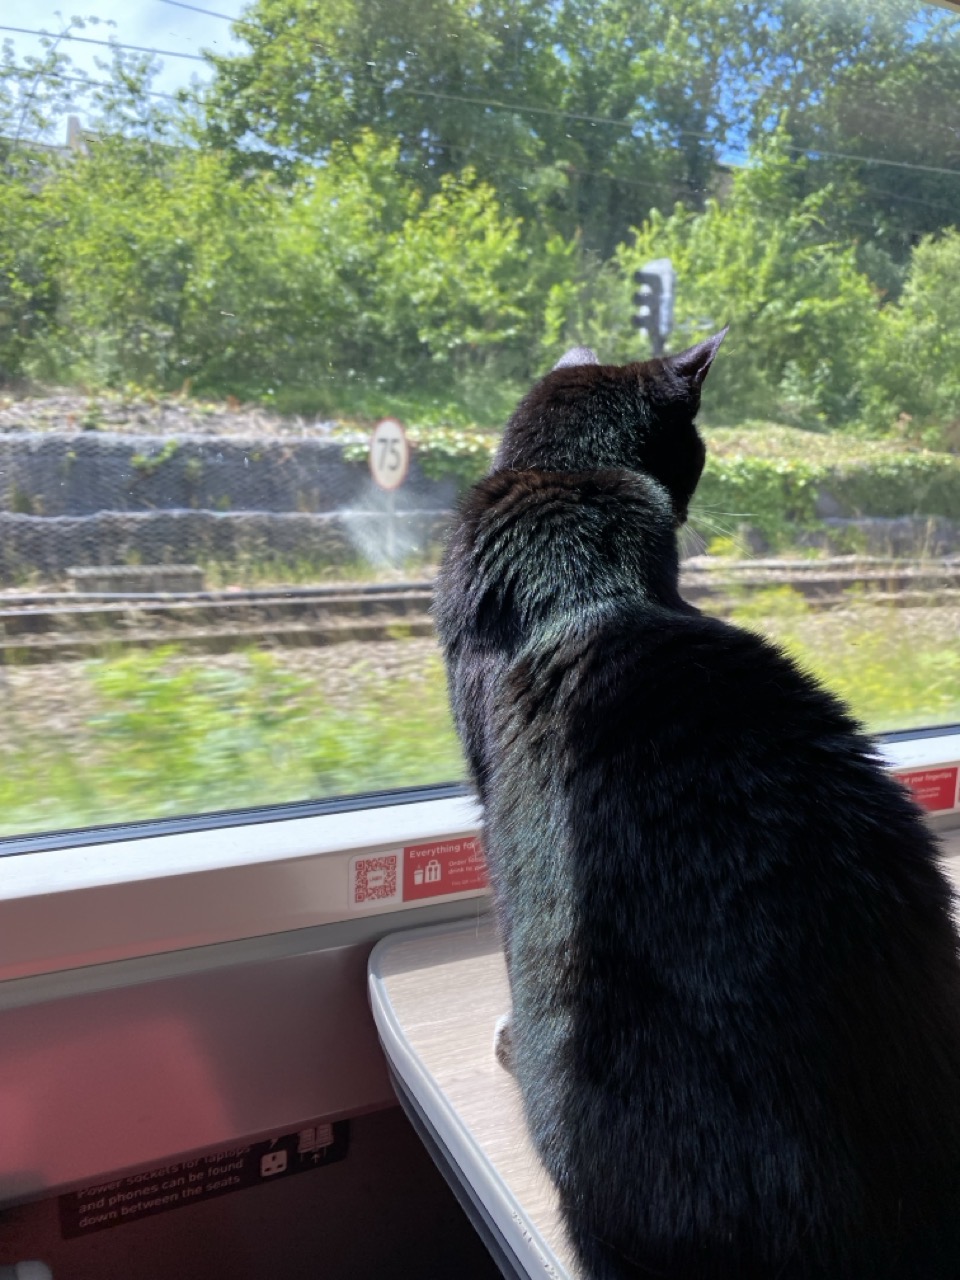 A black cat looking out the window of the train.